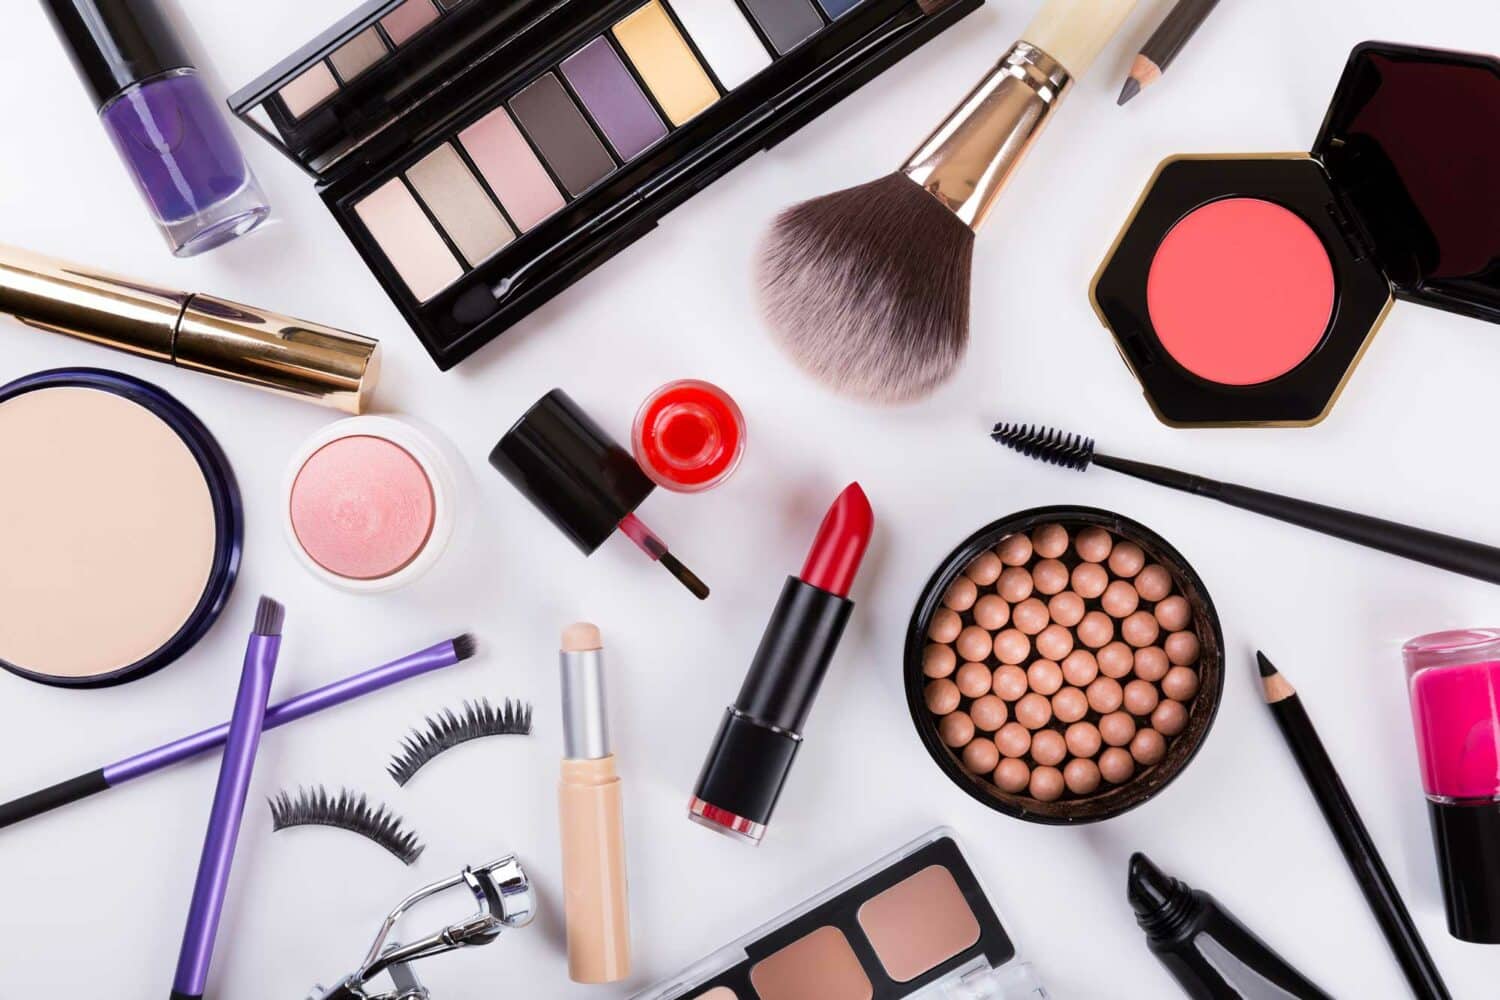 What Should I Really Be Doing Now to Tone and Brighten for FDA Cosmetics Compliance?